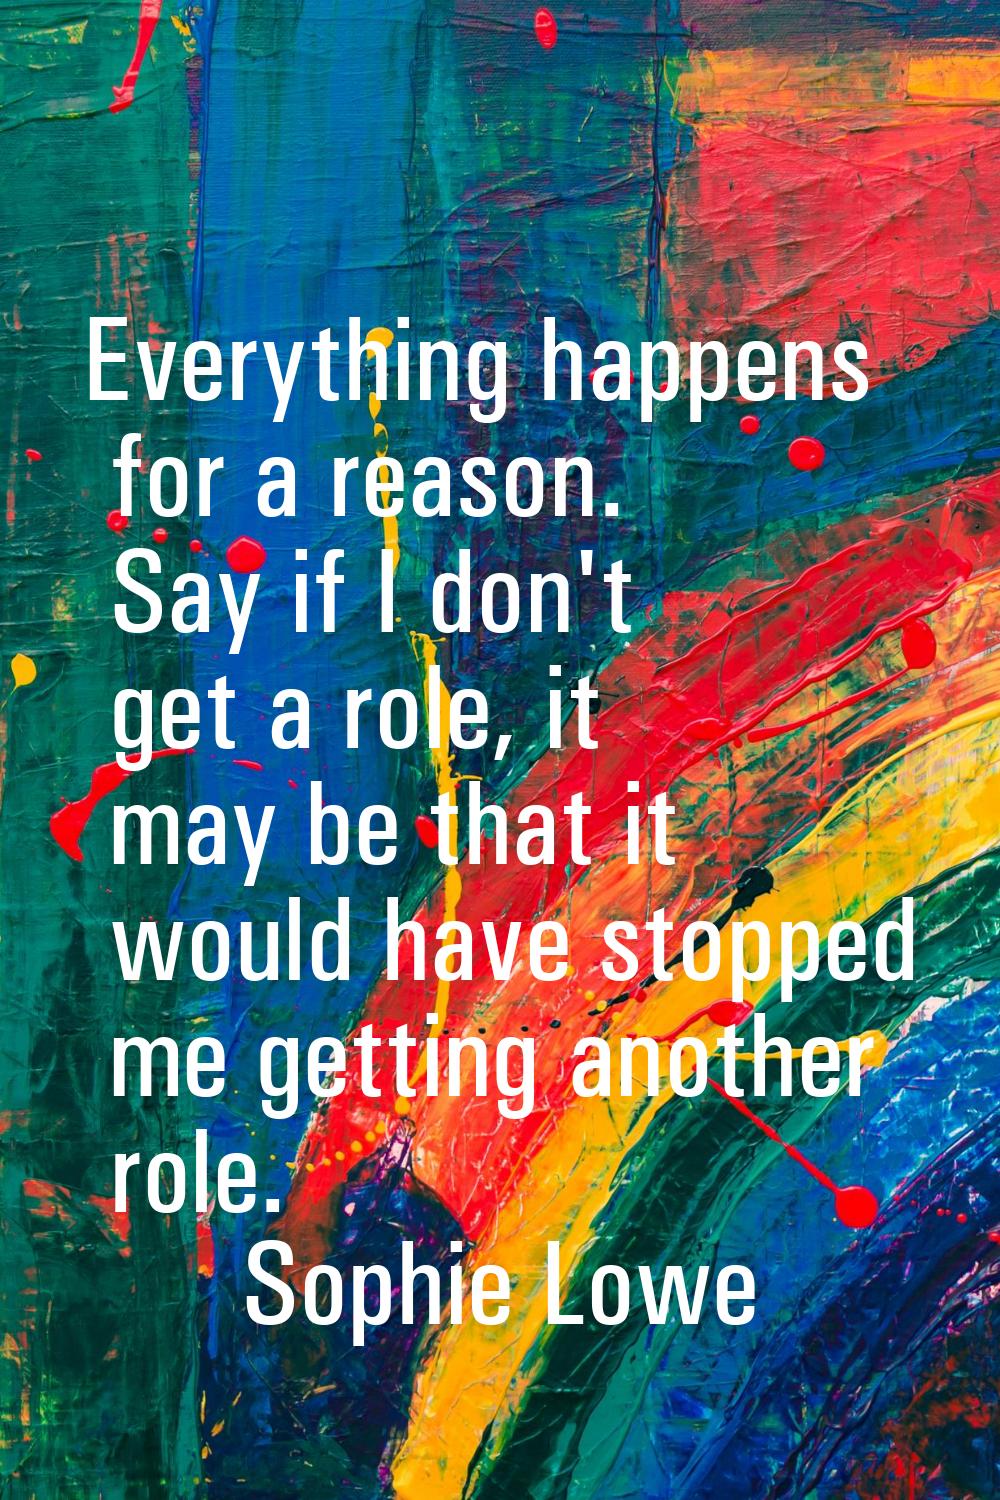 Everything happens for a reason. Say if I don't get a role, it may be that it would have stopped me